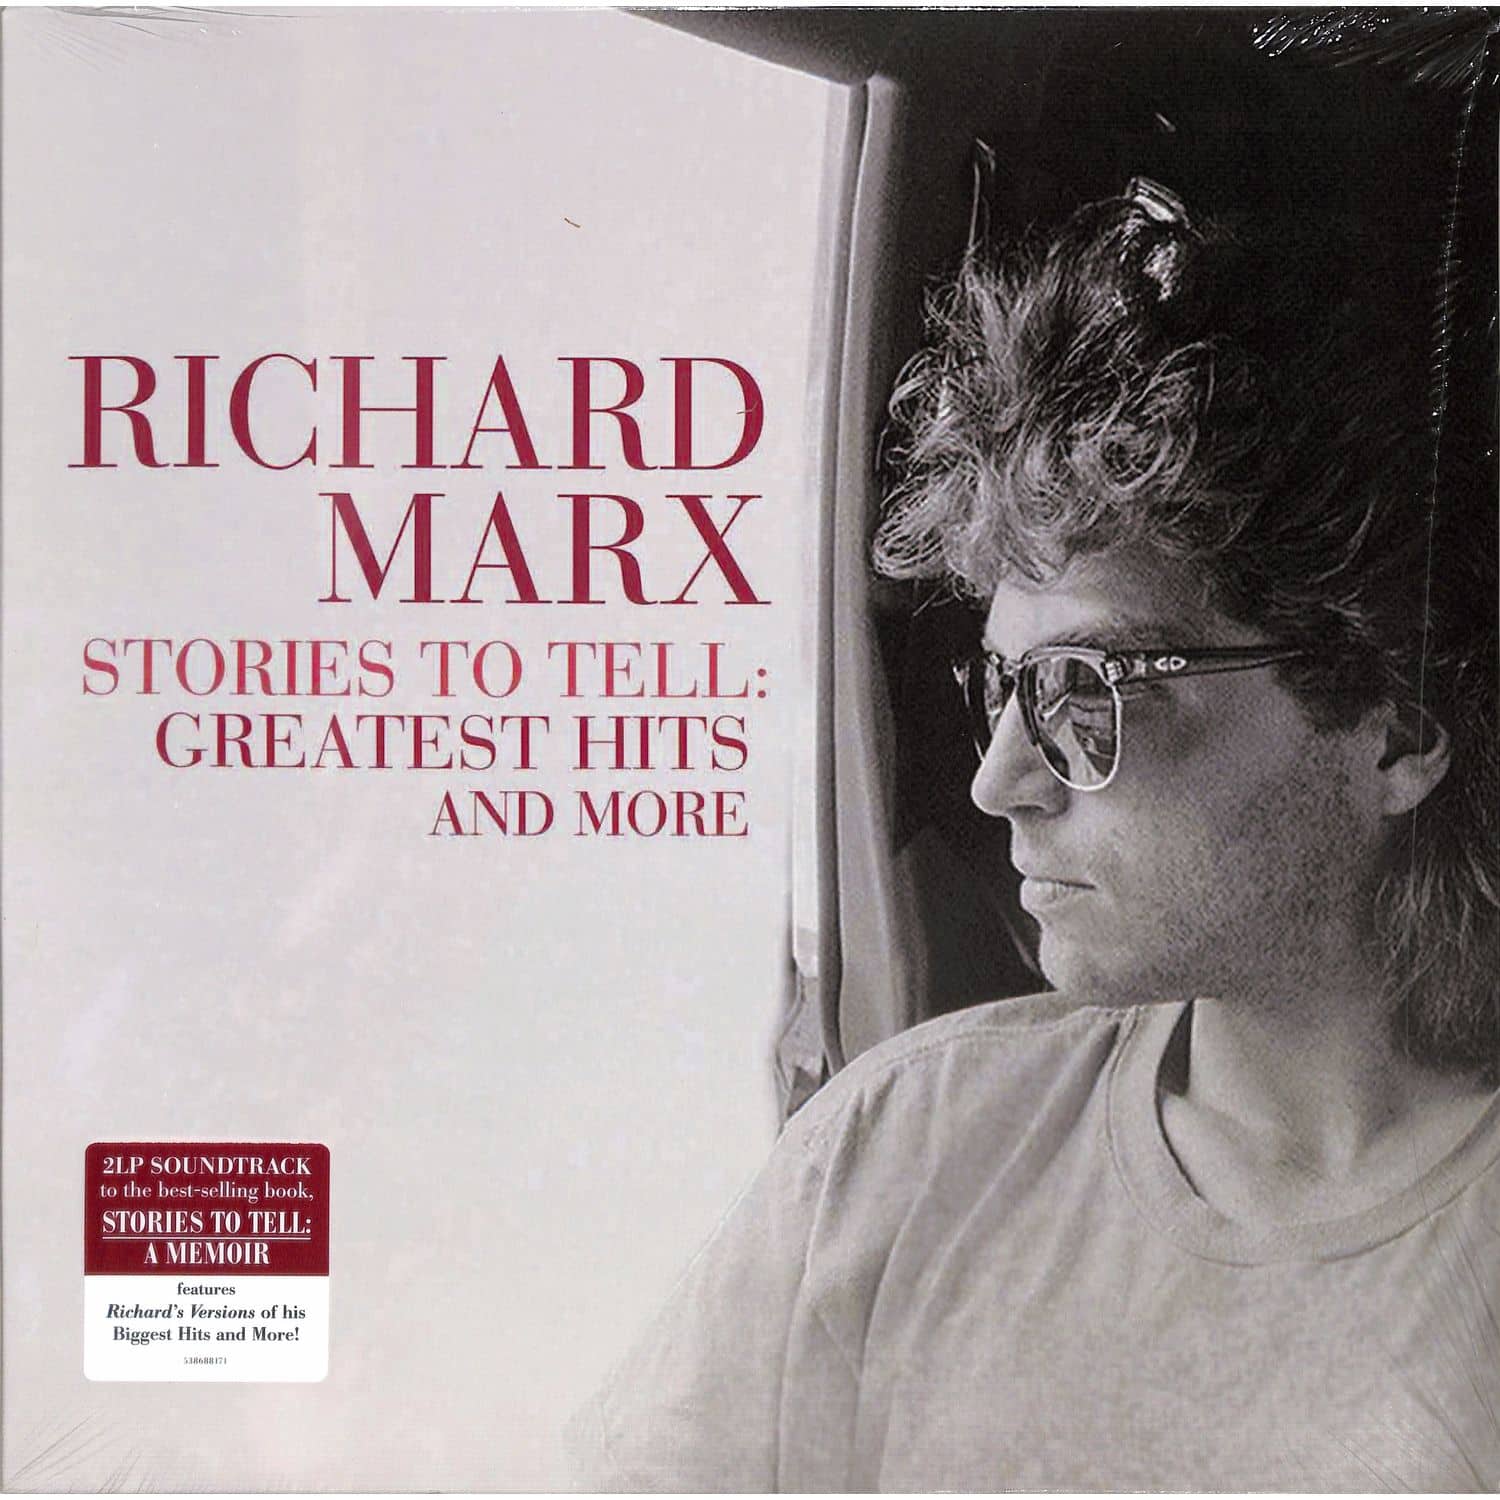 Richard Marx - STORIES TO TELL: GREATEST HITS AND MORE 